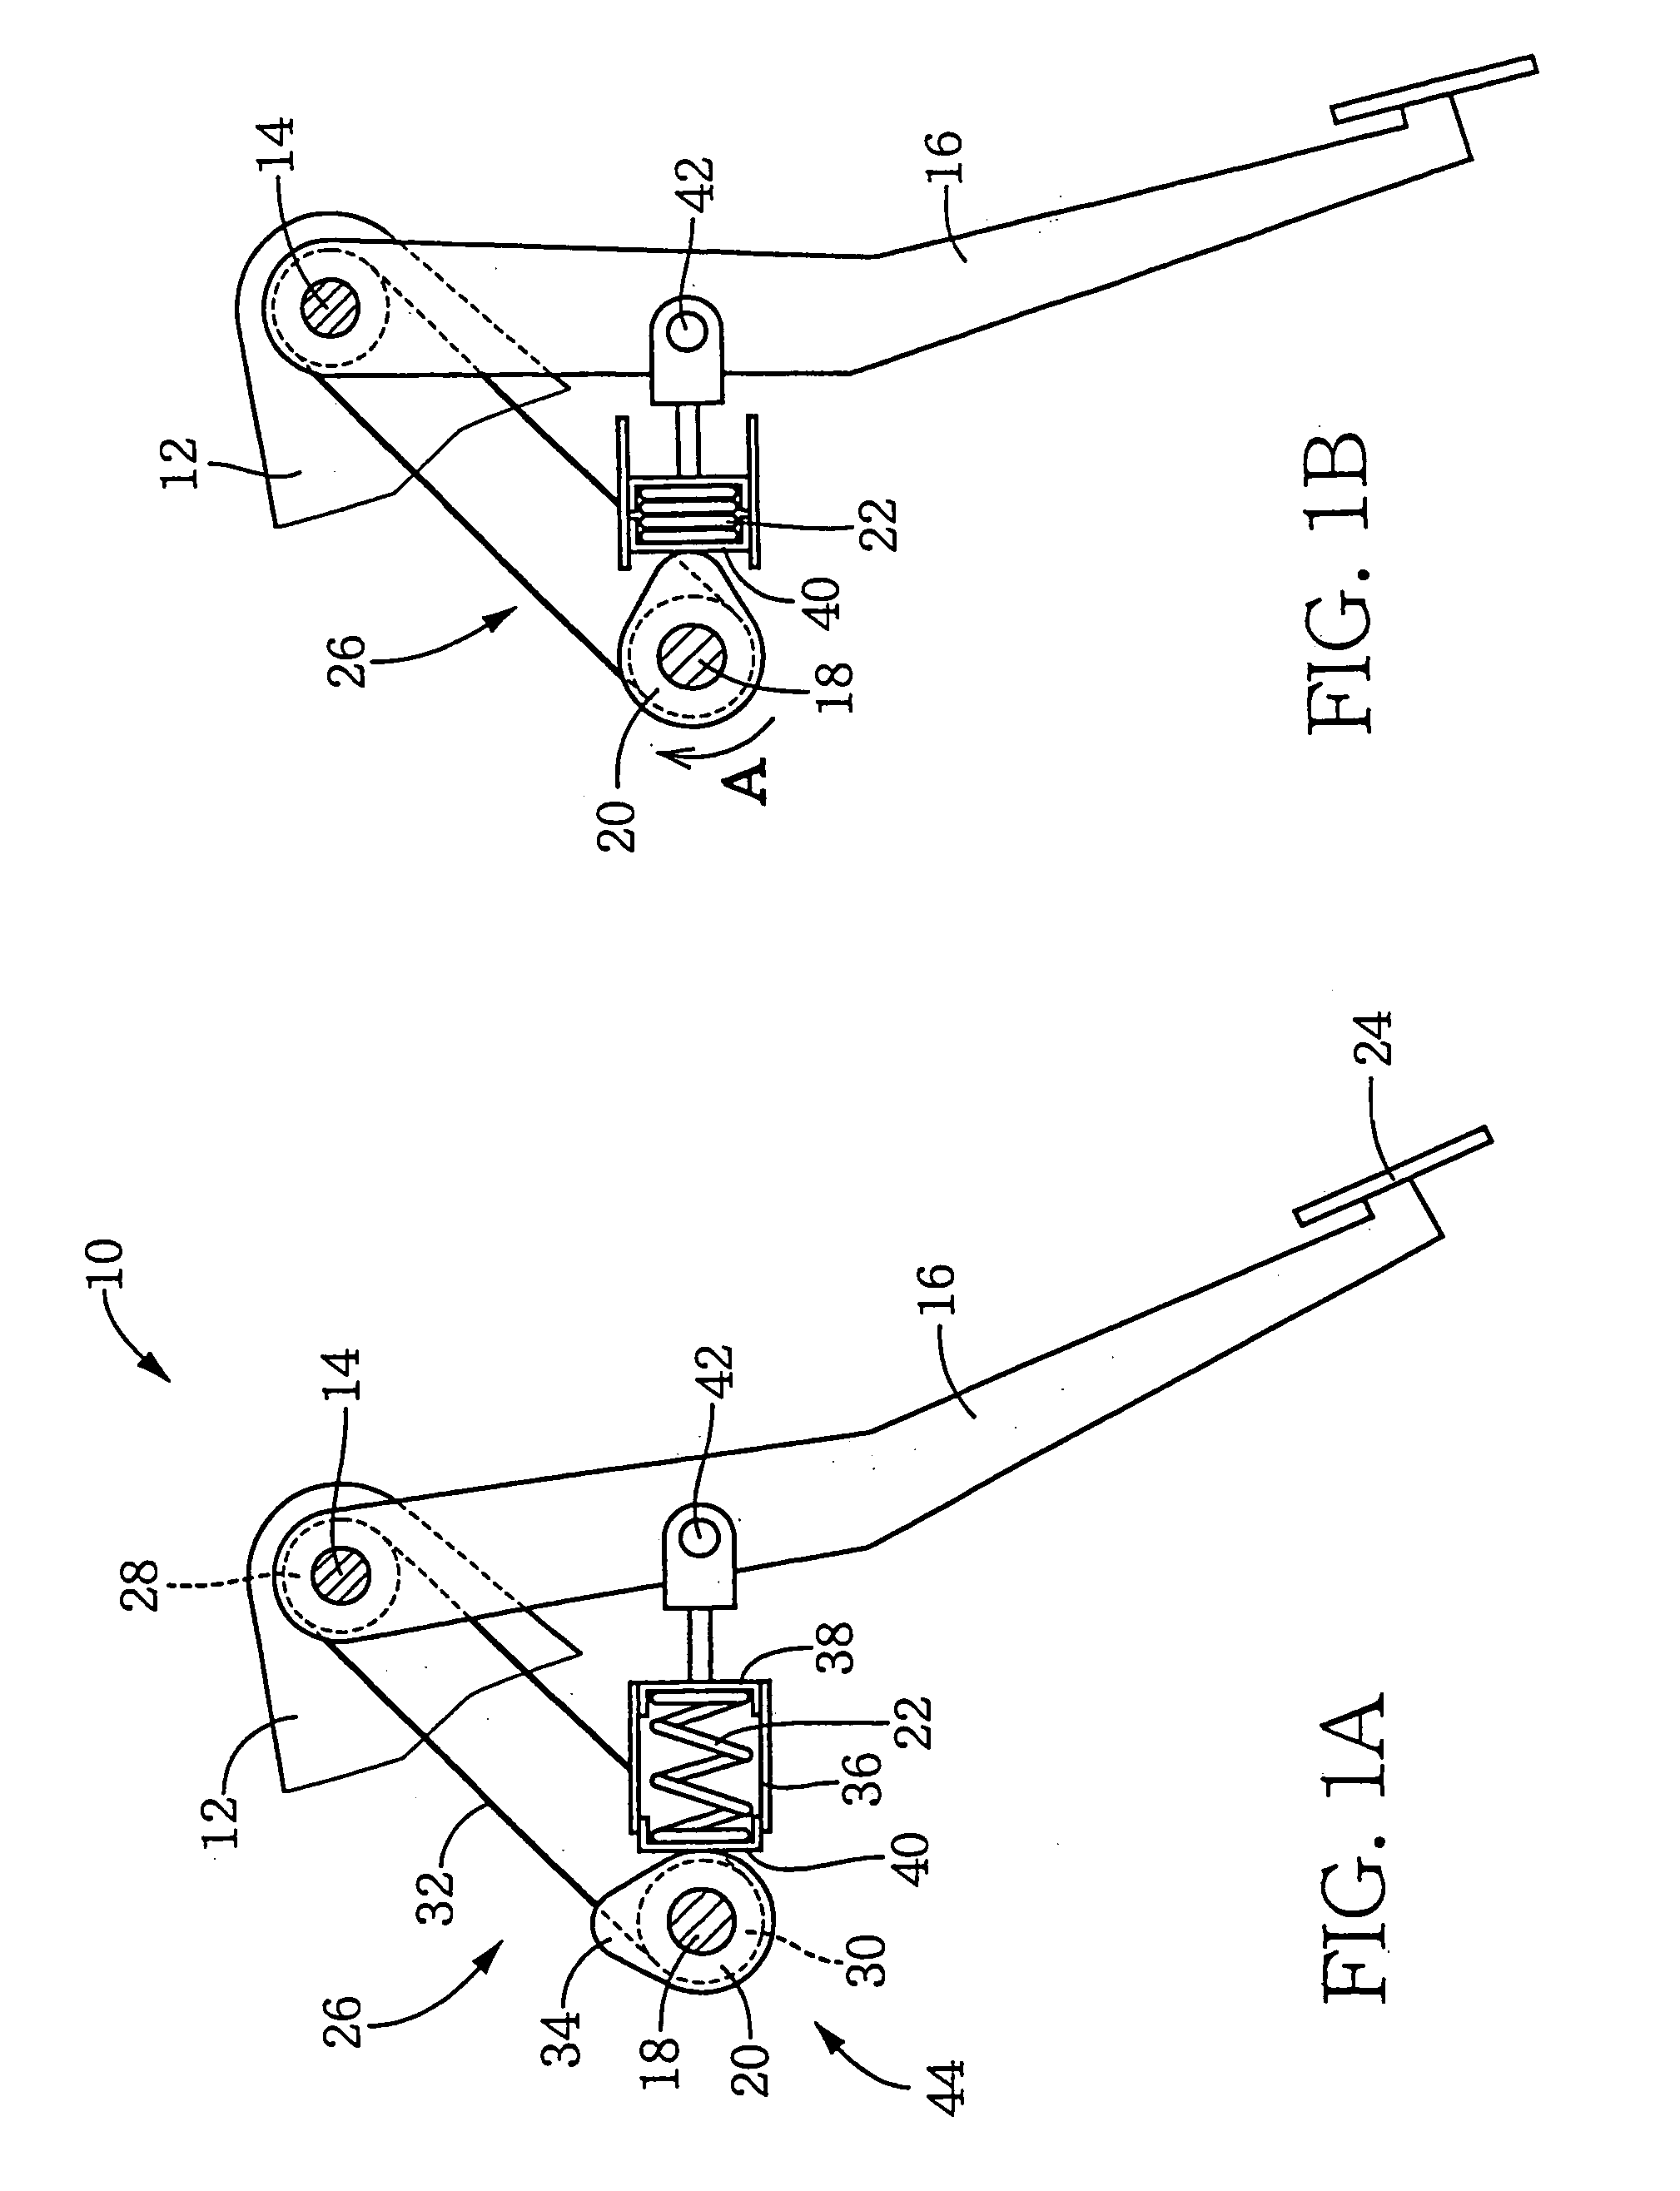 Apparatus for applying a reaction force to a pivotally supported pedal member upon depression thereof